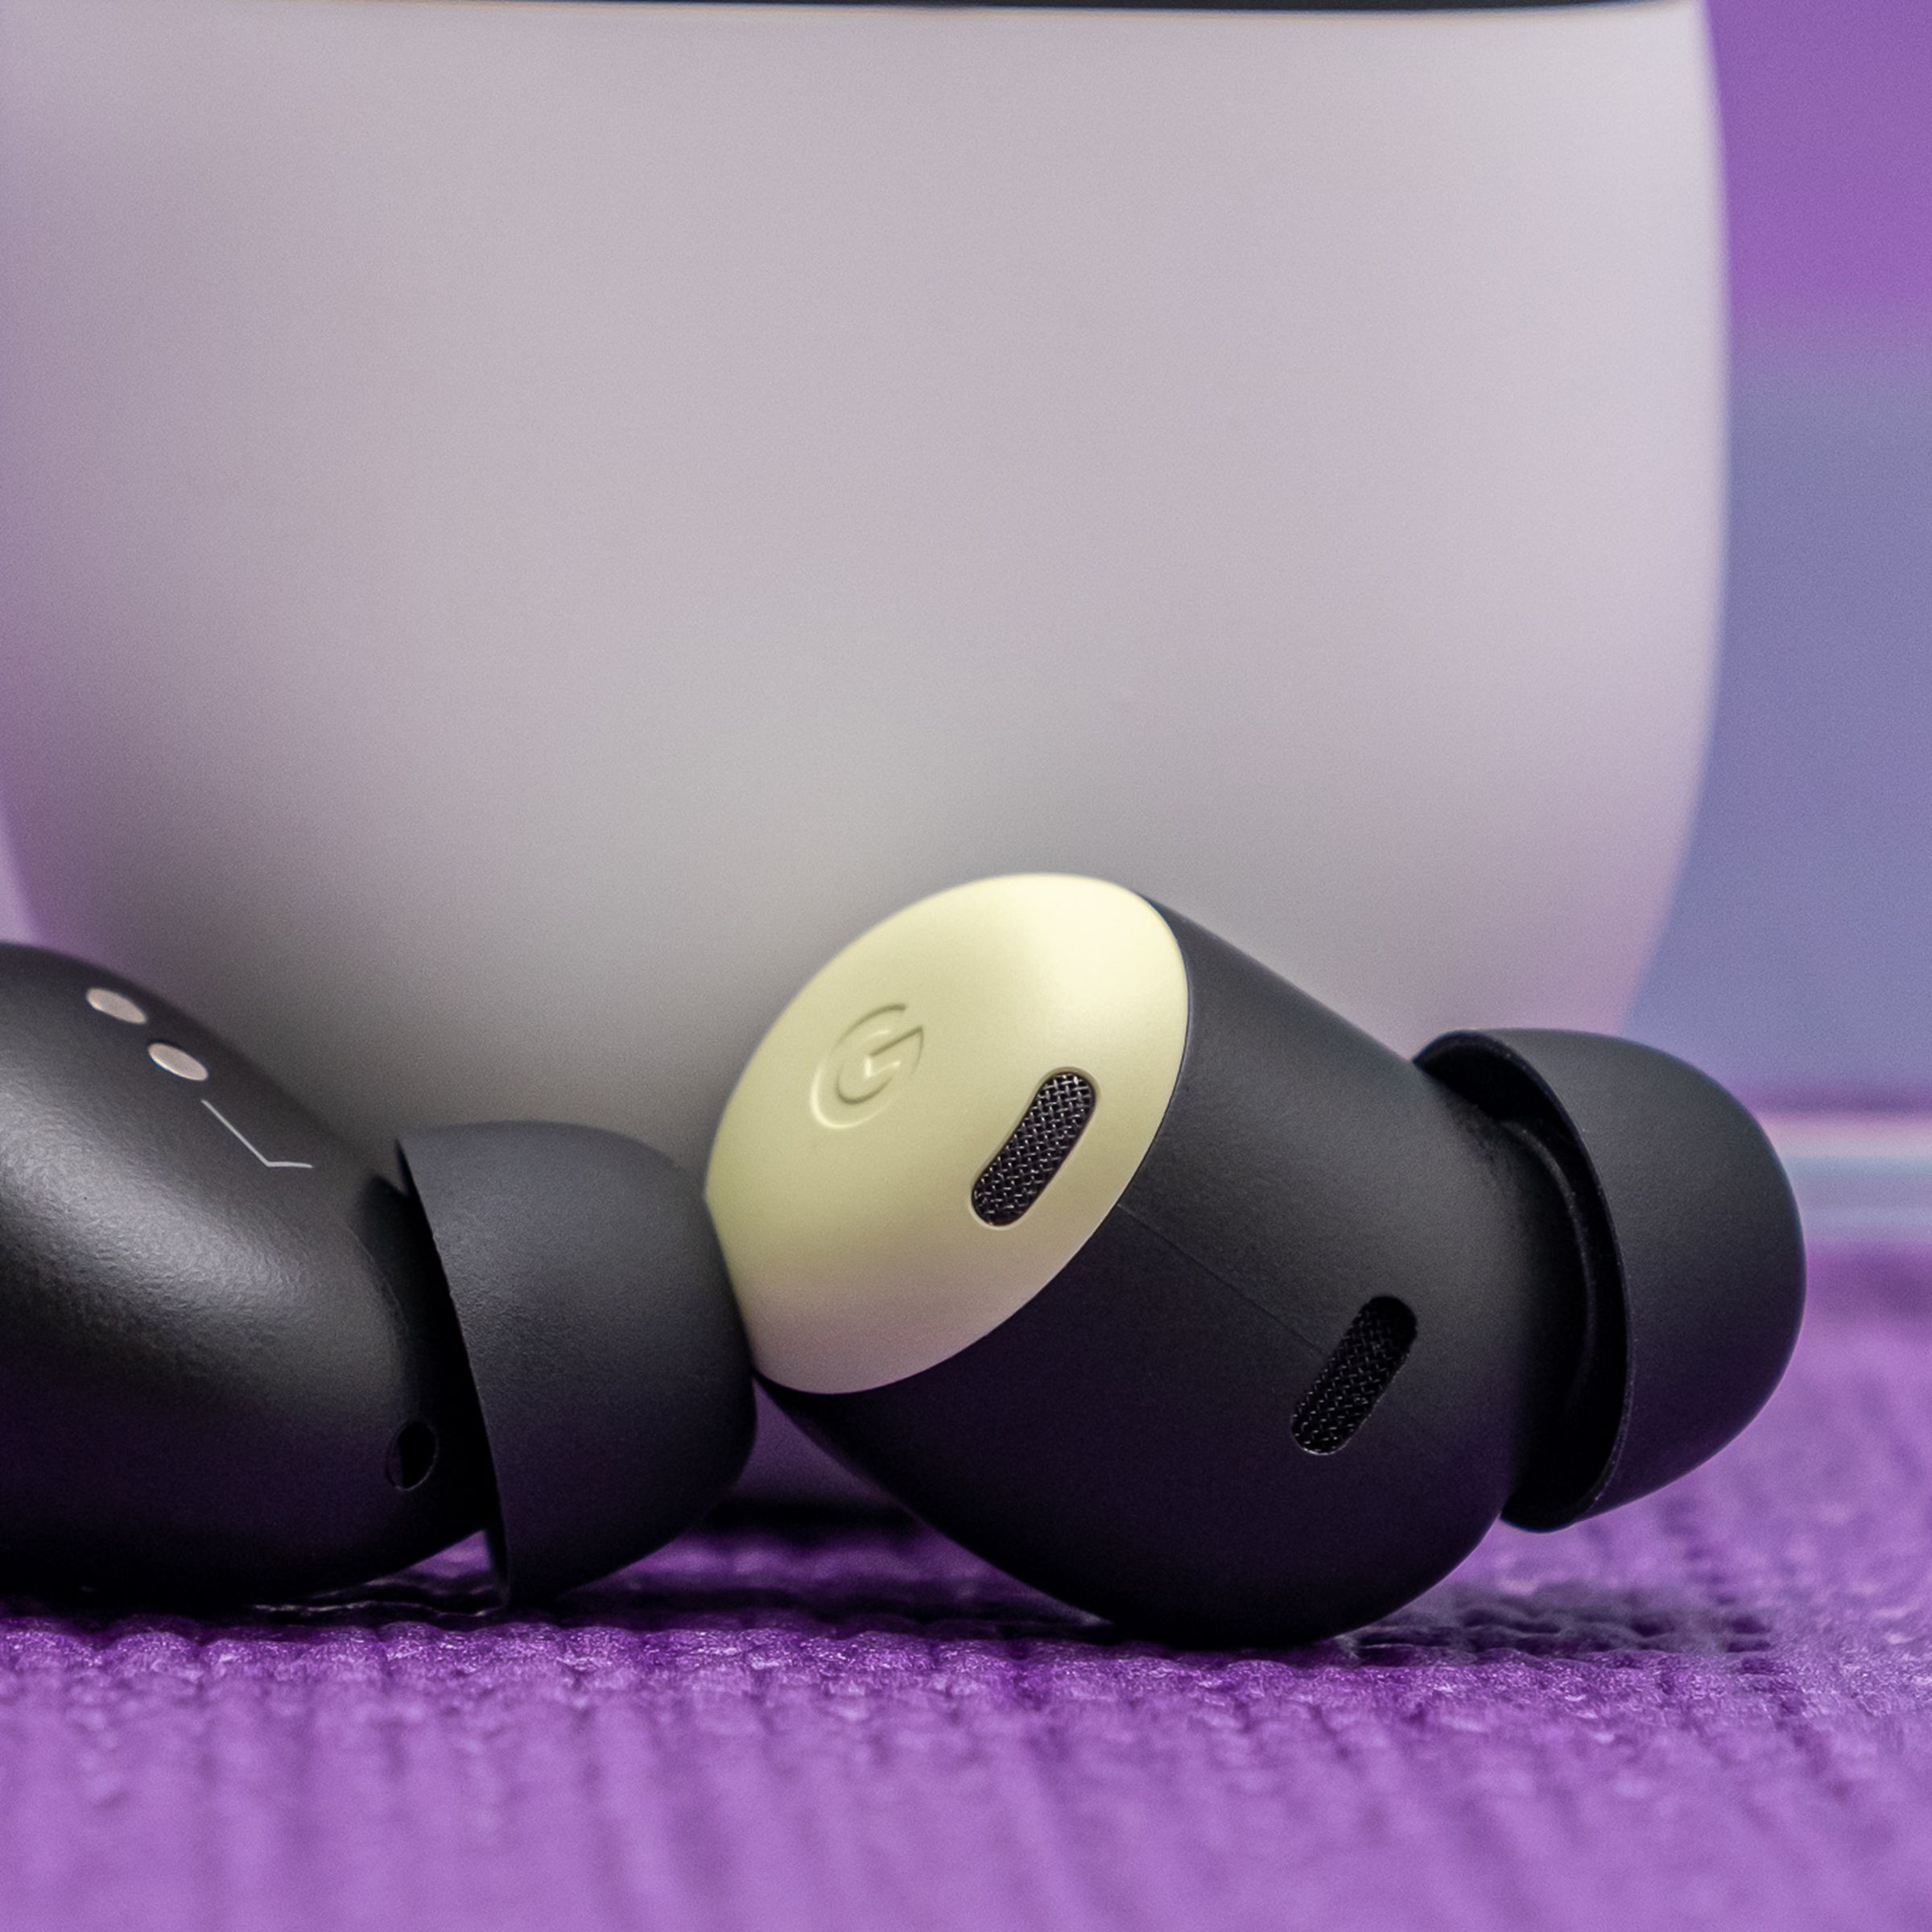 Google's Pixel Buds Pro earbuds, in lemongrass yellow, rest at the foot of their white charging case on a tabletop.